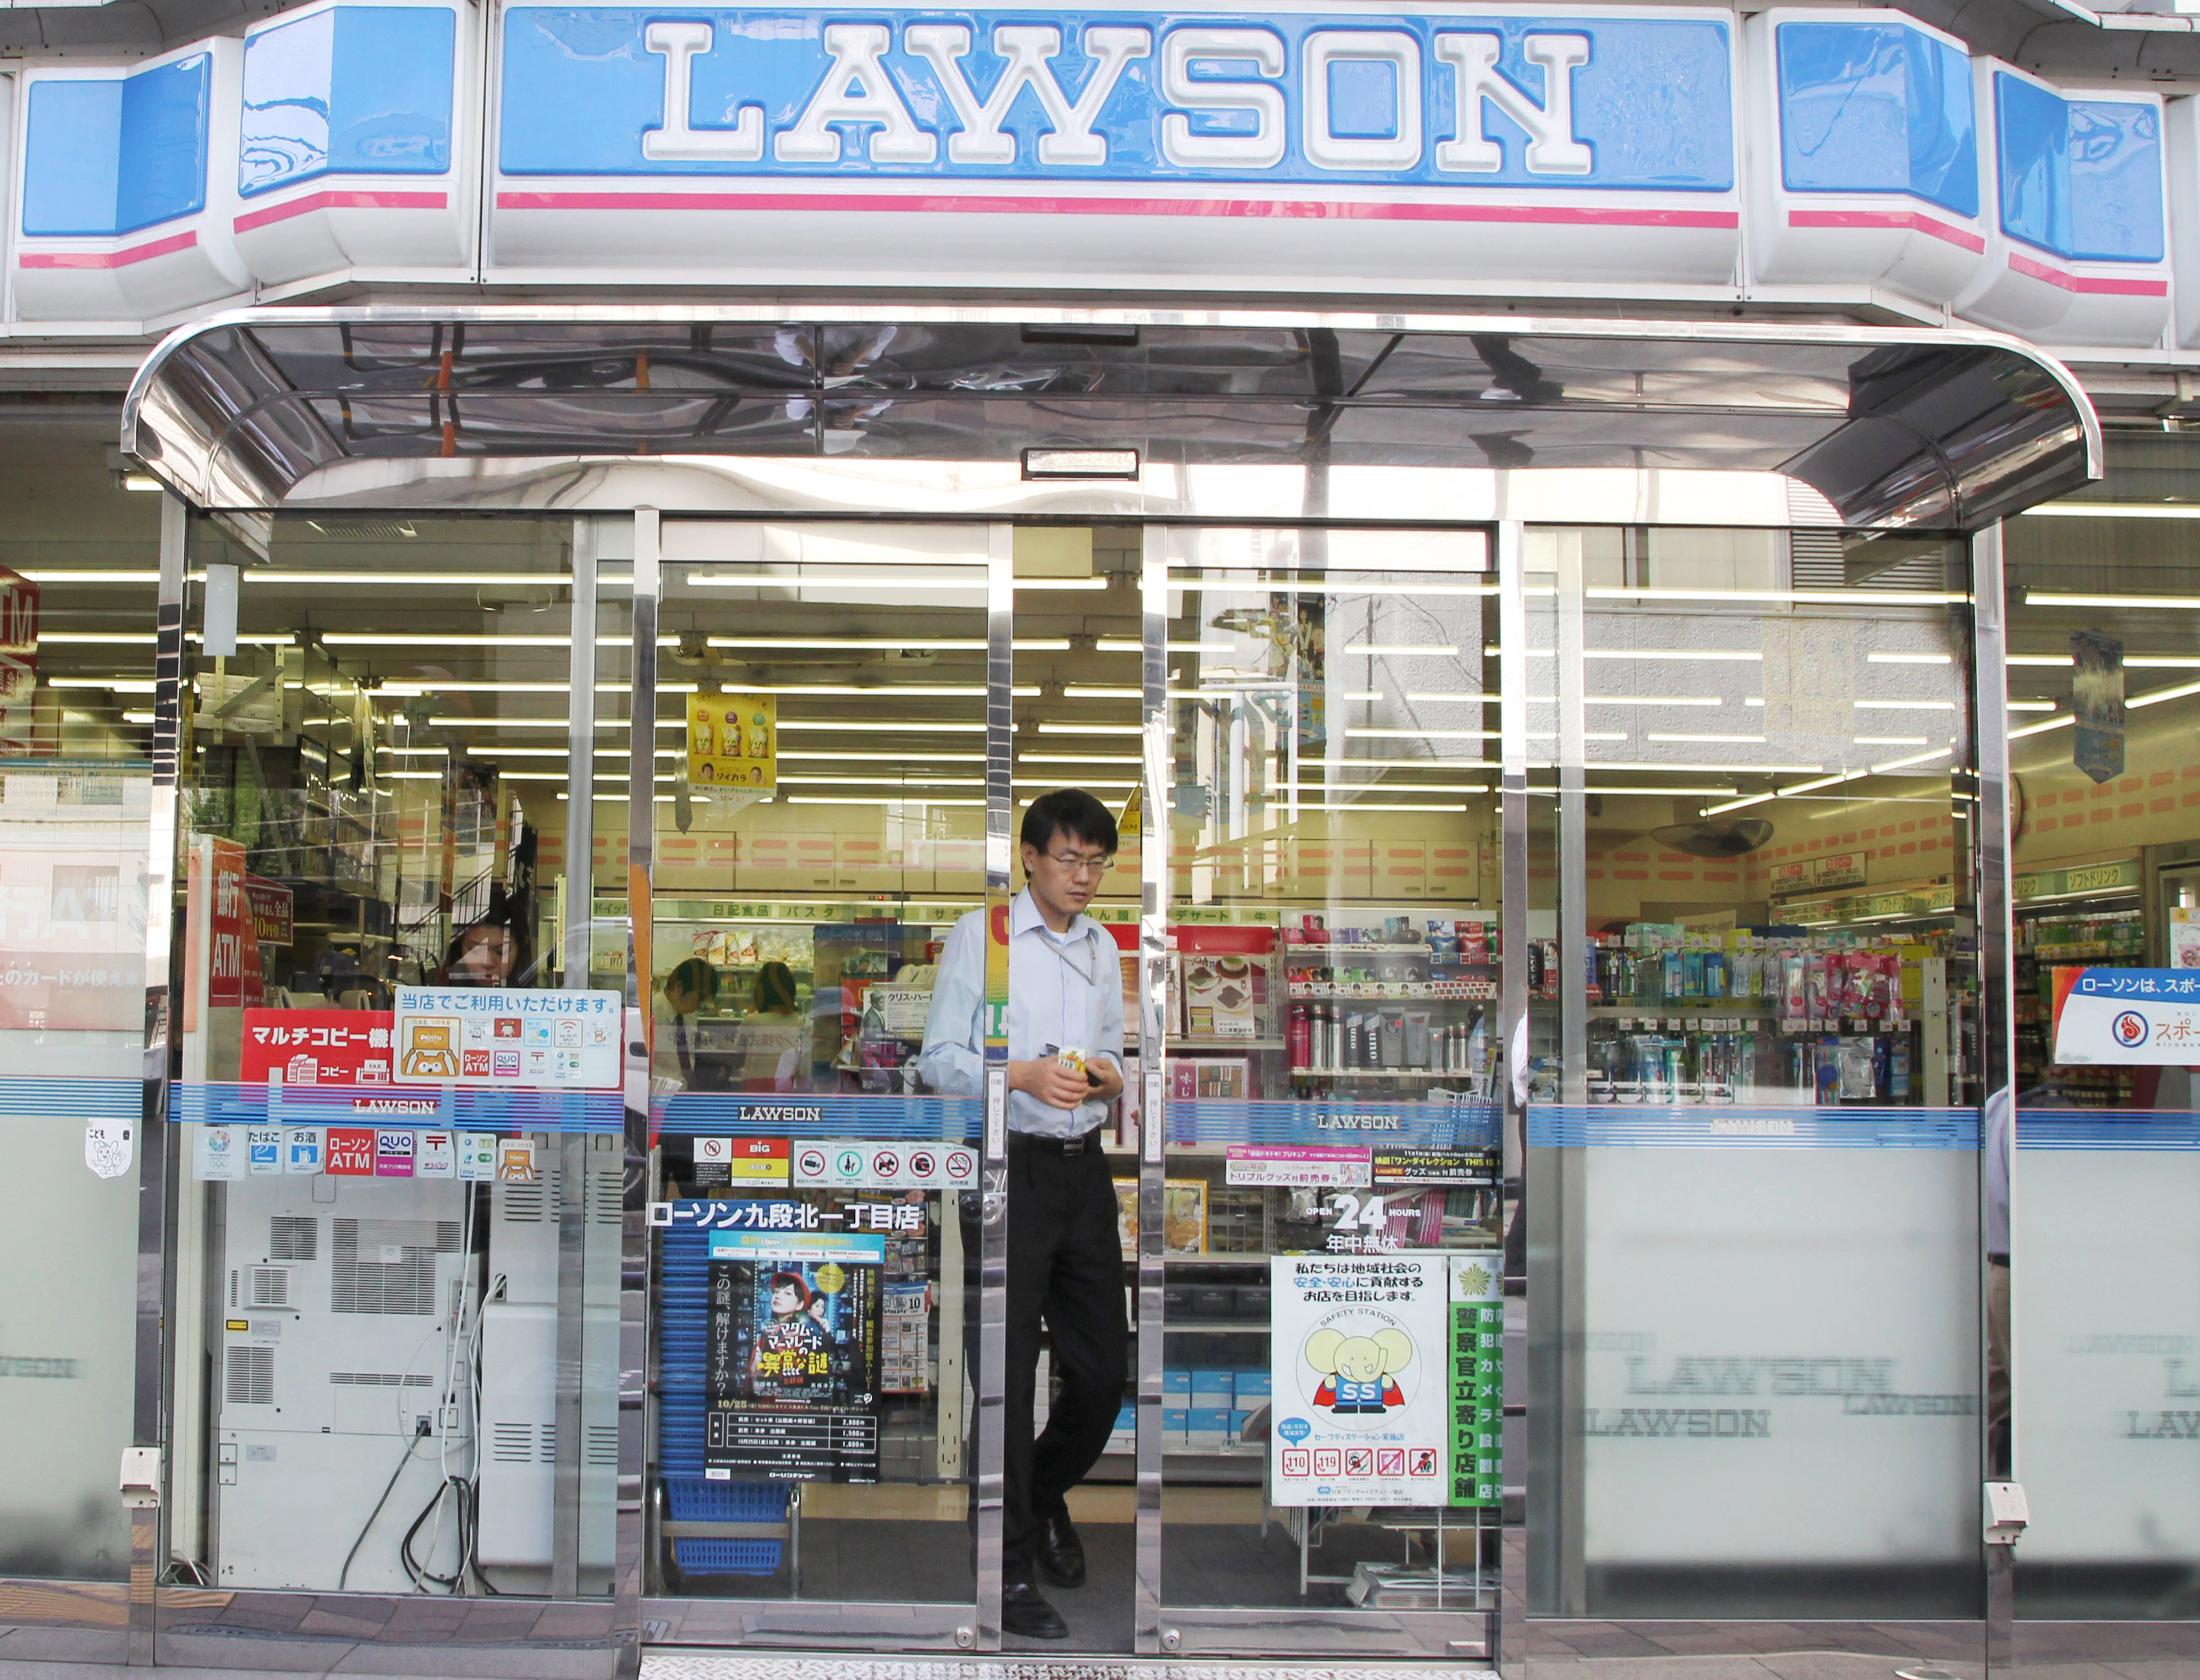 General Images Of Lawson Inc. Convenience Stores as Company Reports Earnings